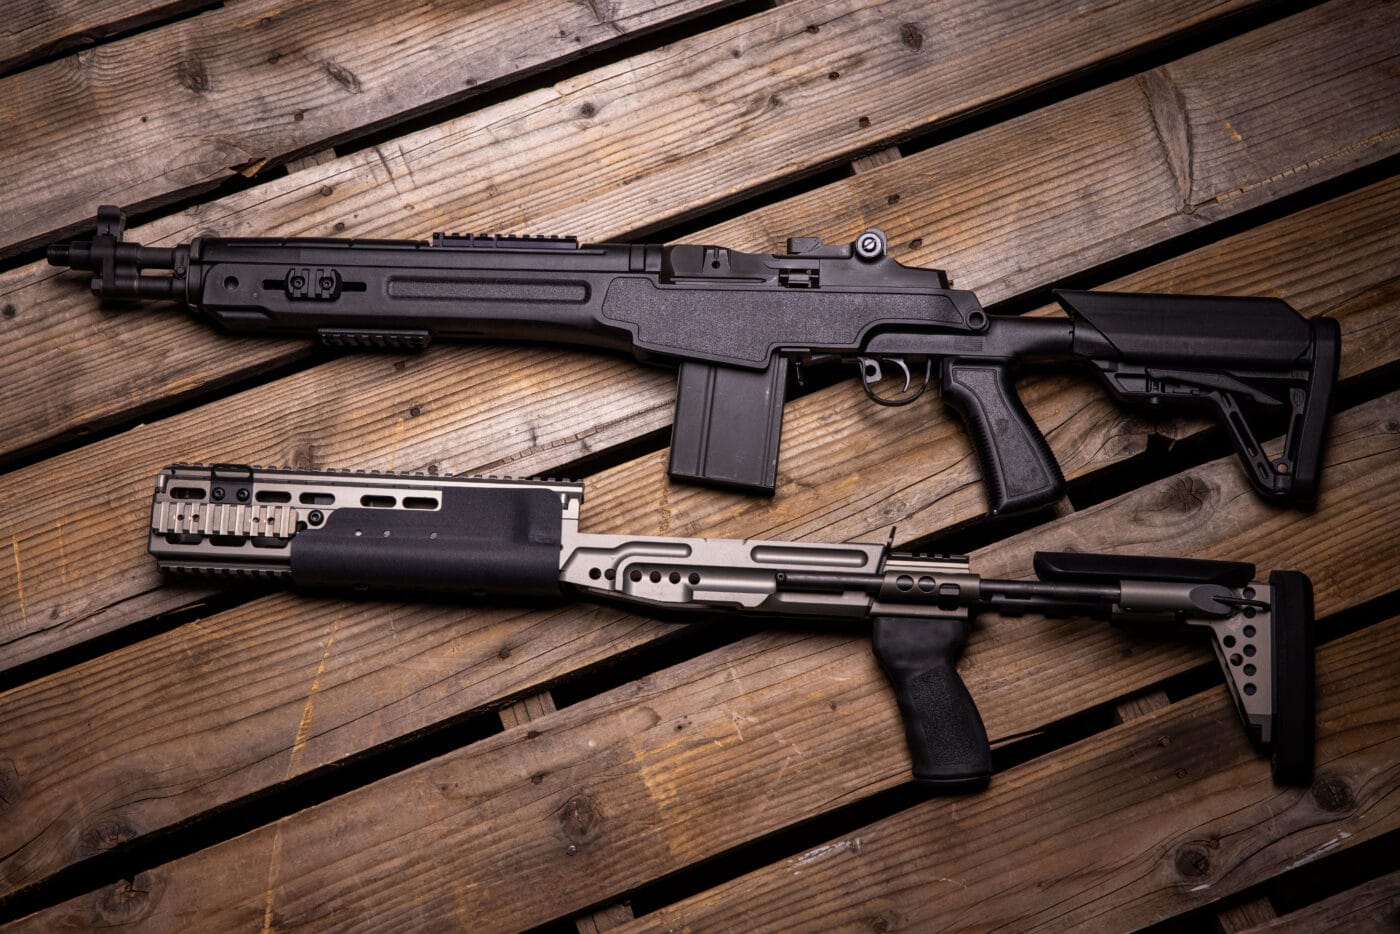 Aftermarket M1A stock shown next to Springfield M1A SOCOM 16 CQB rifle